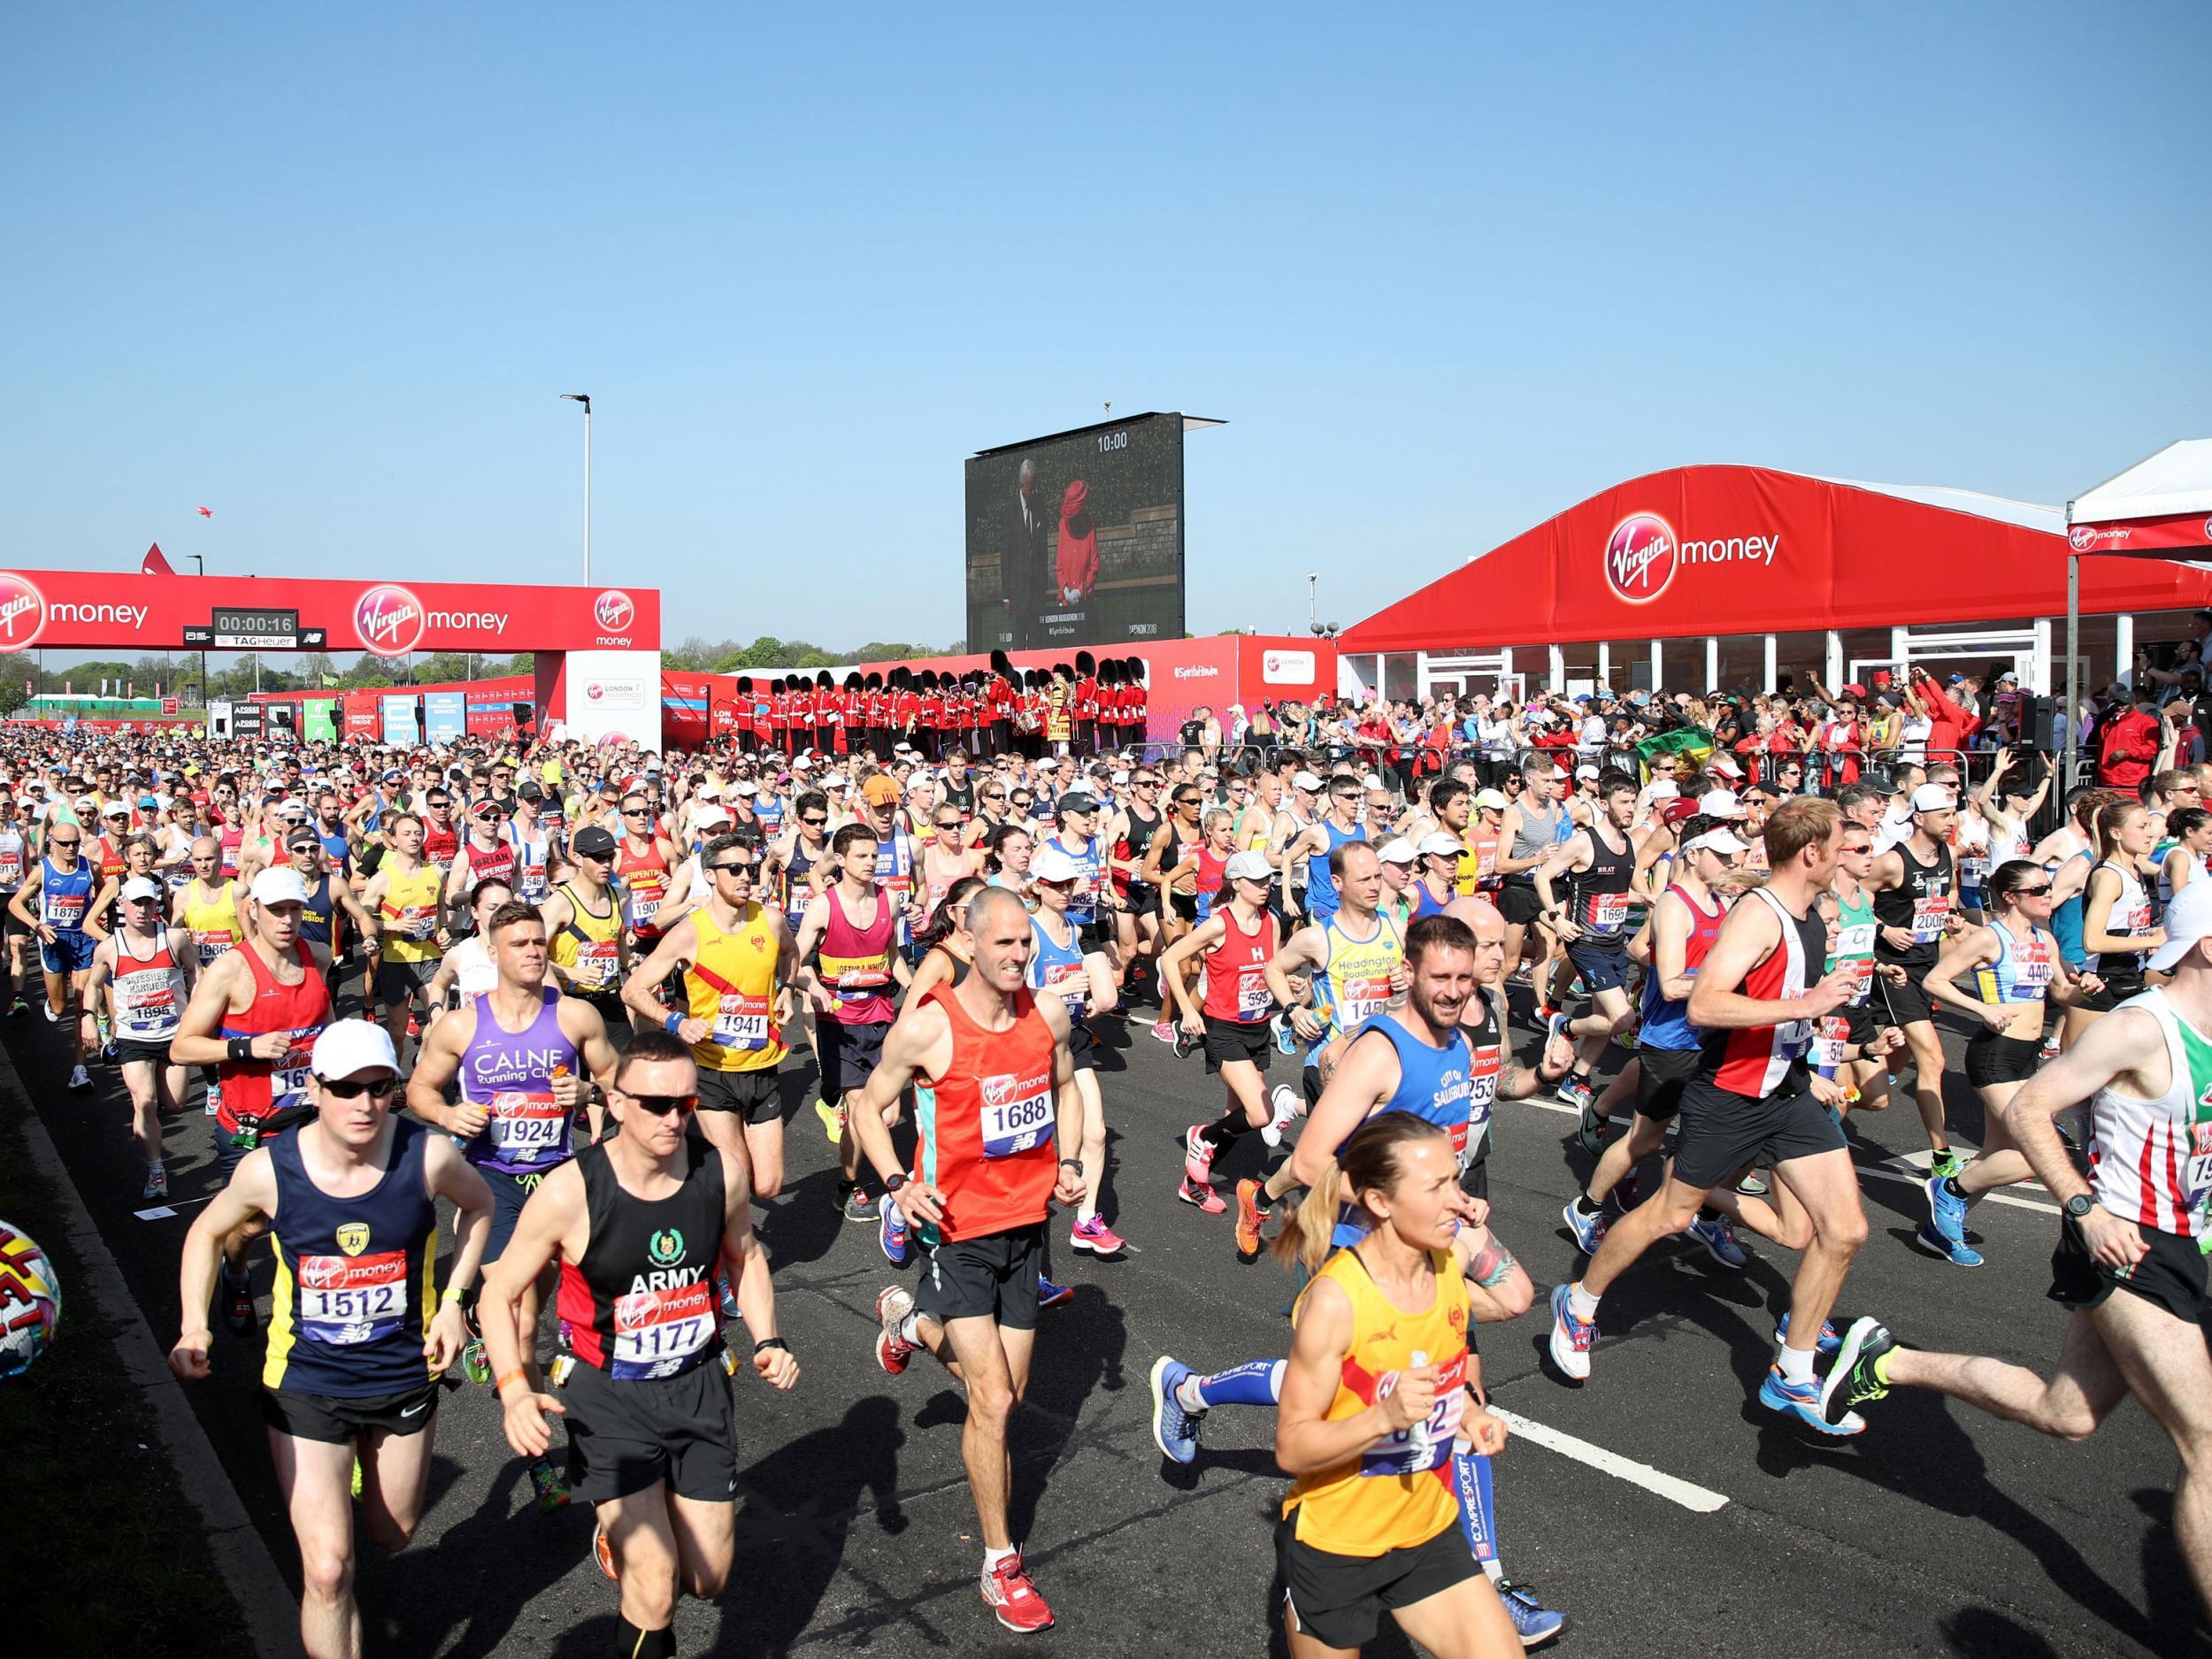 More than 40,000 people participated in the London marathon in 2018